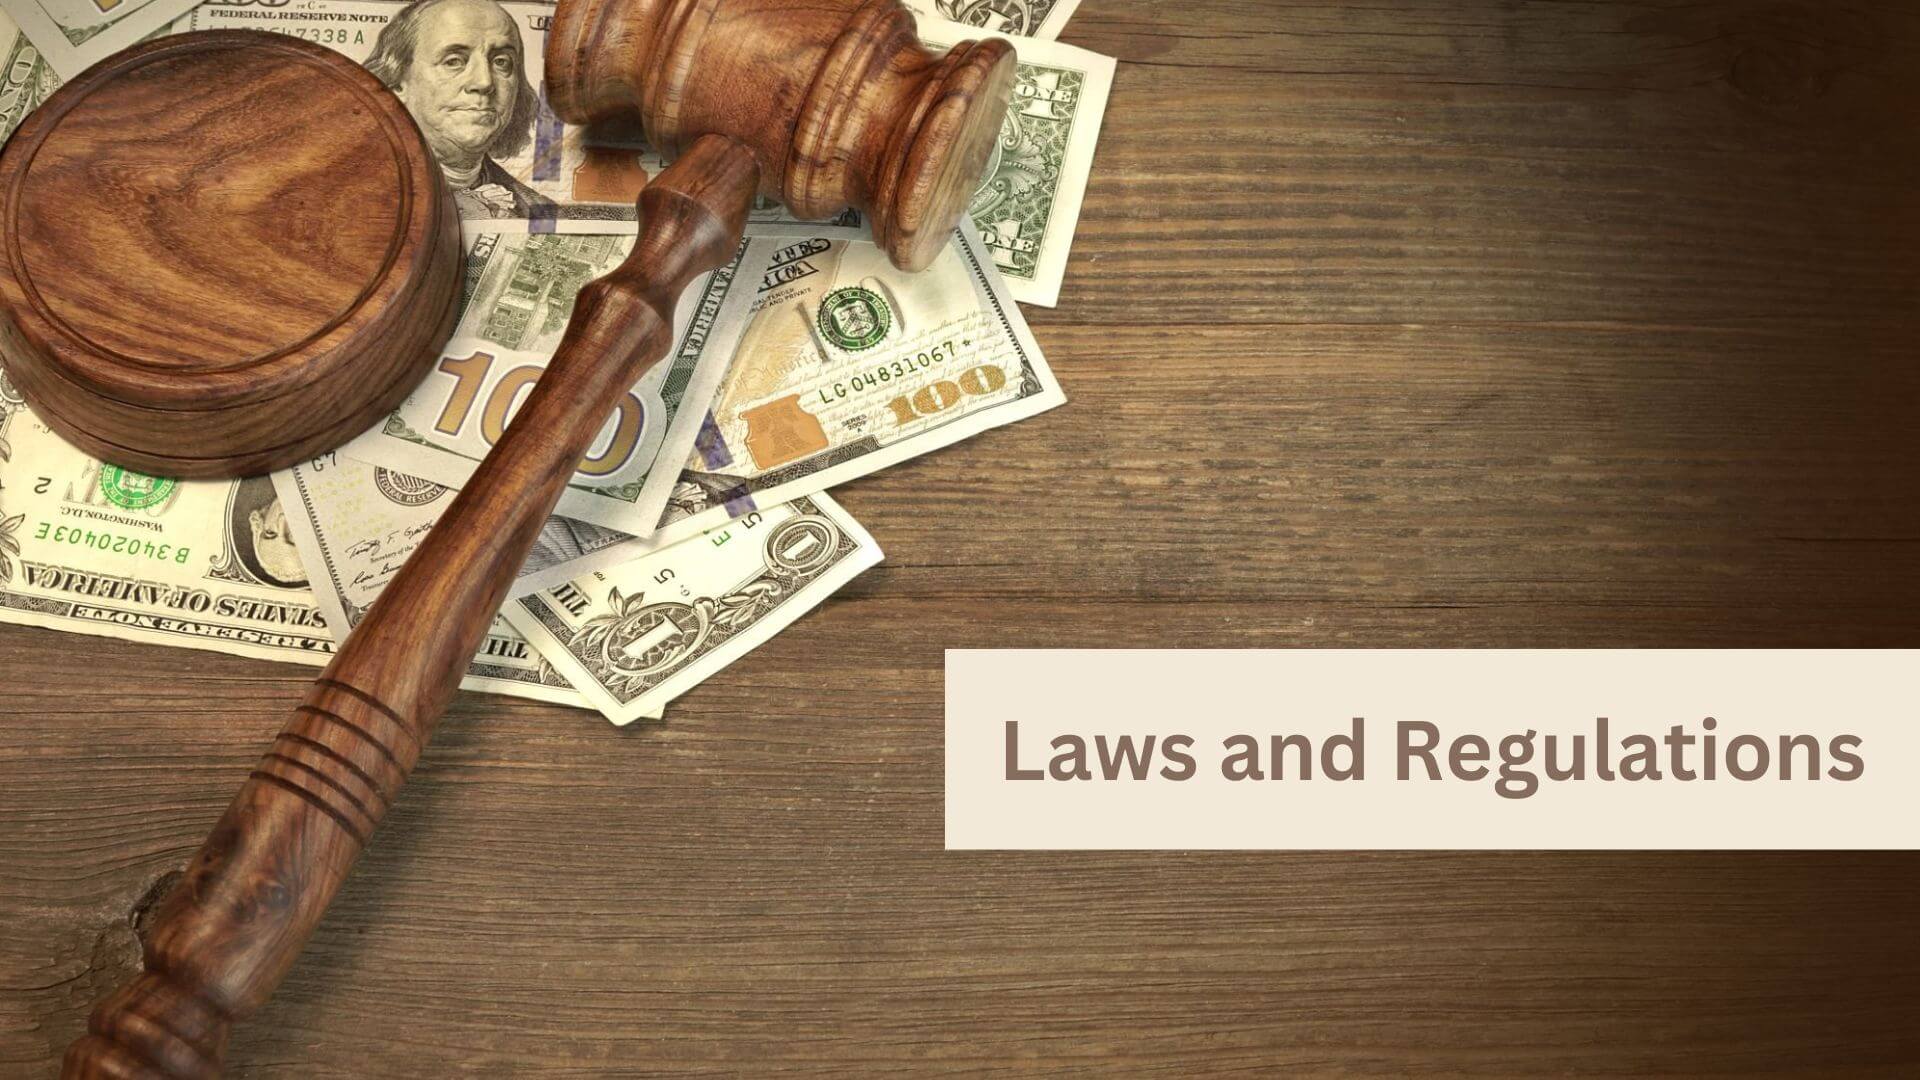 CALIFORNIA TITLE LOAN LAWS AND REGULATIONS